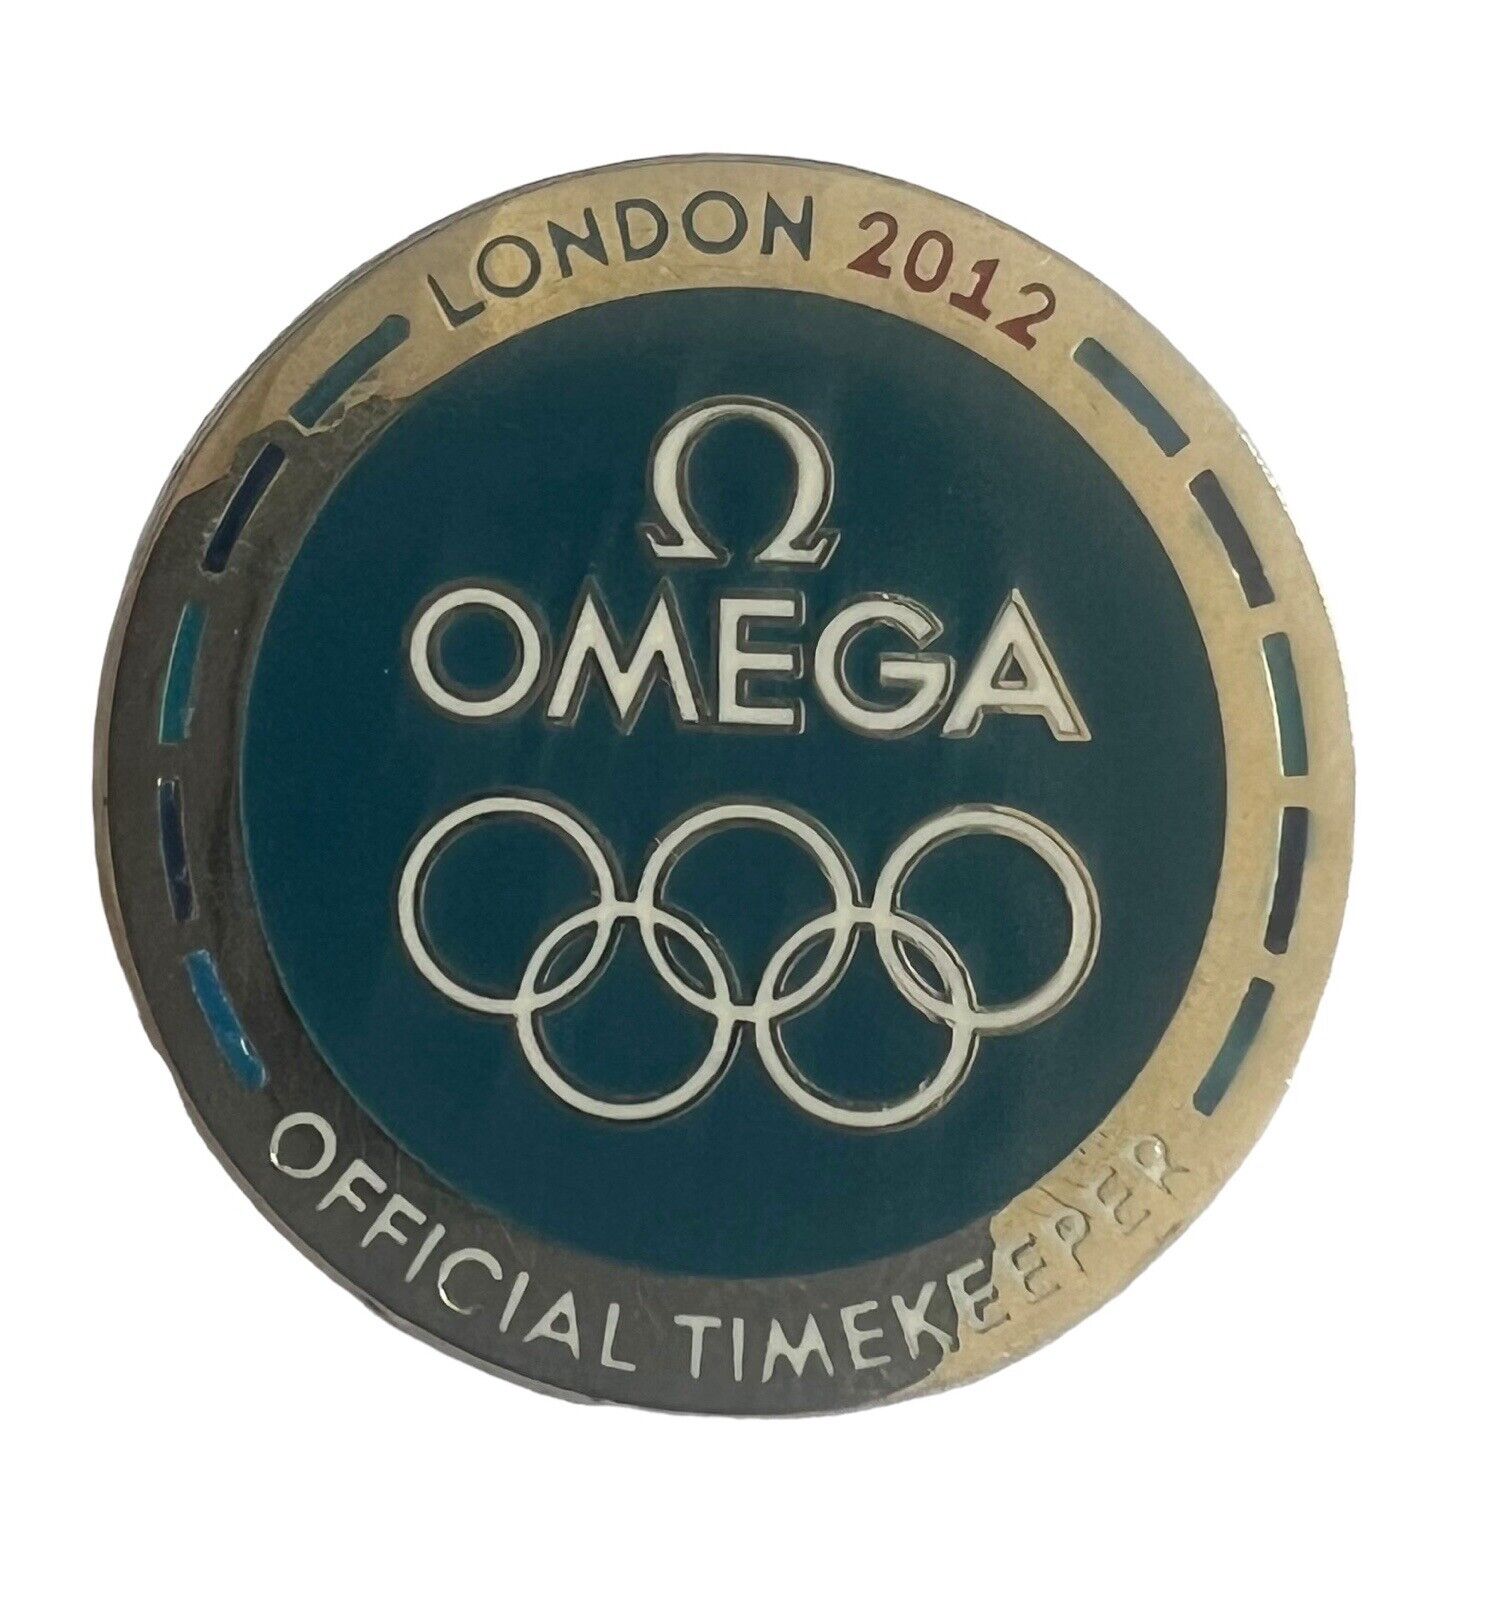 Genuine OMEGA Official Timekeeper - Olympic Rings Silver Pin Badge - LONDON 2012